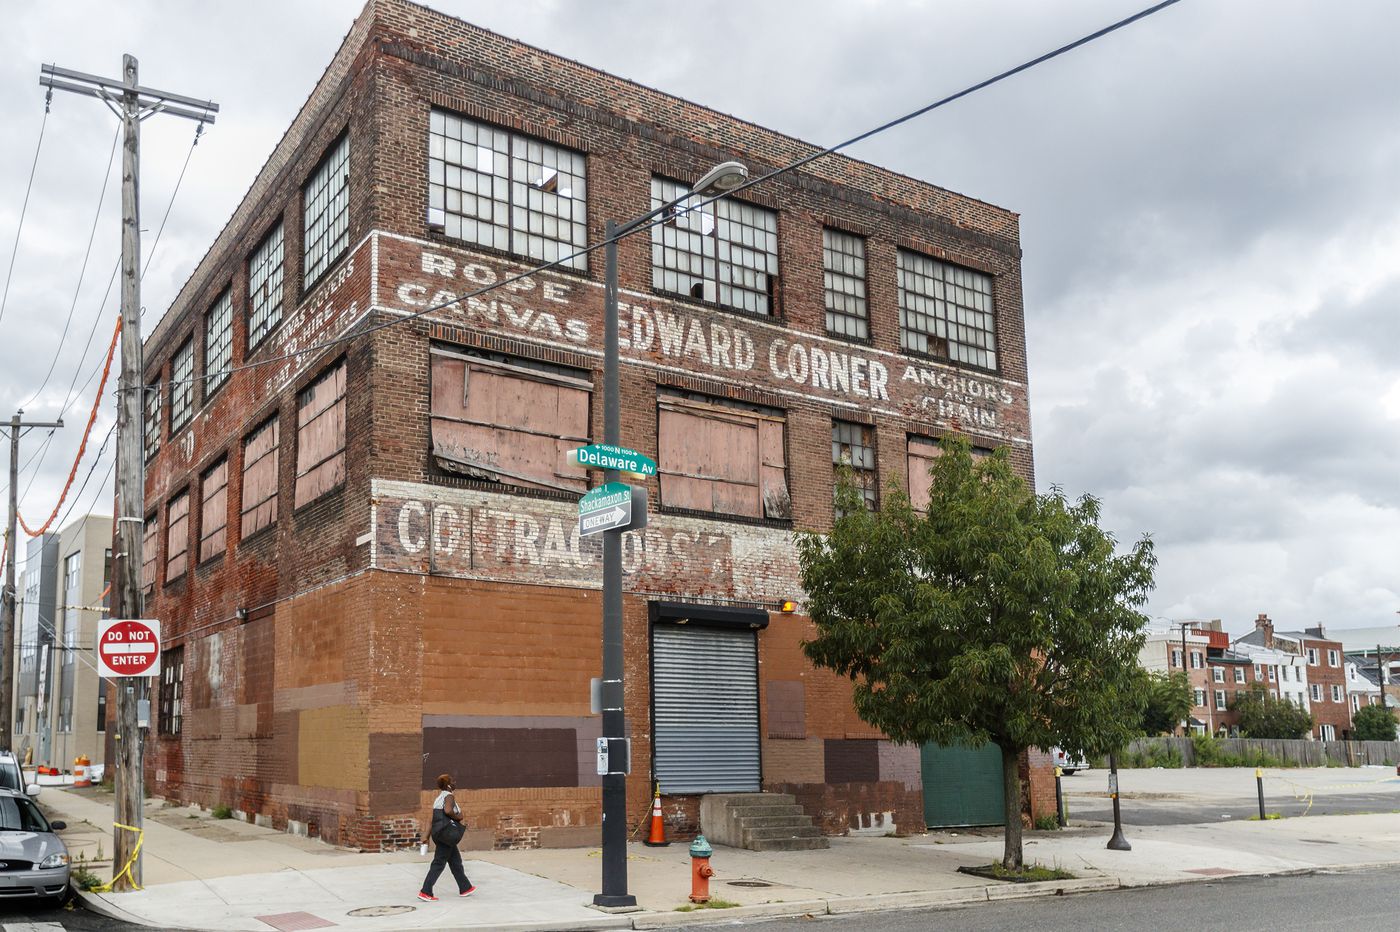 The Edward Corner Building S Journey From Rags To Real Estate